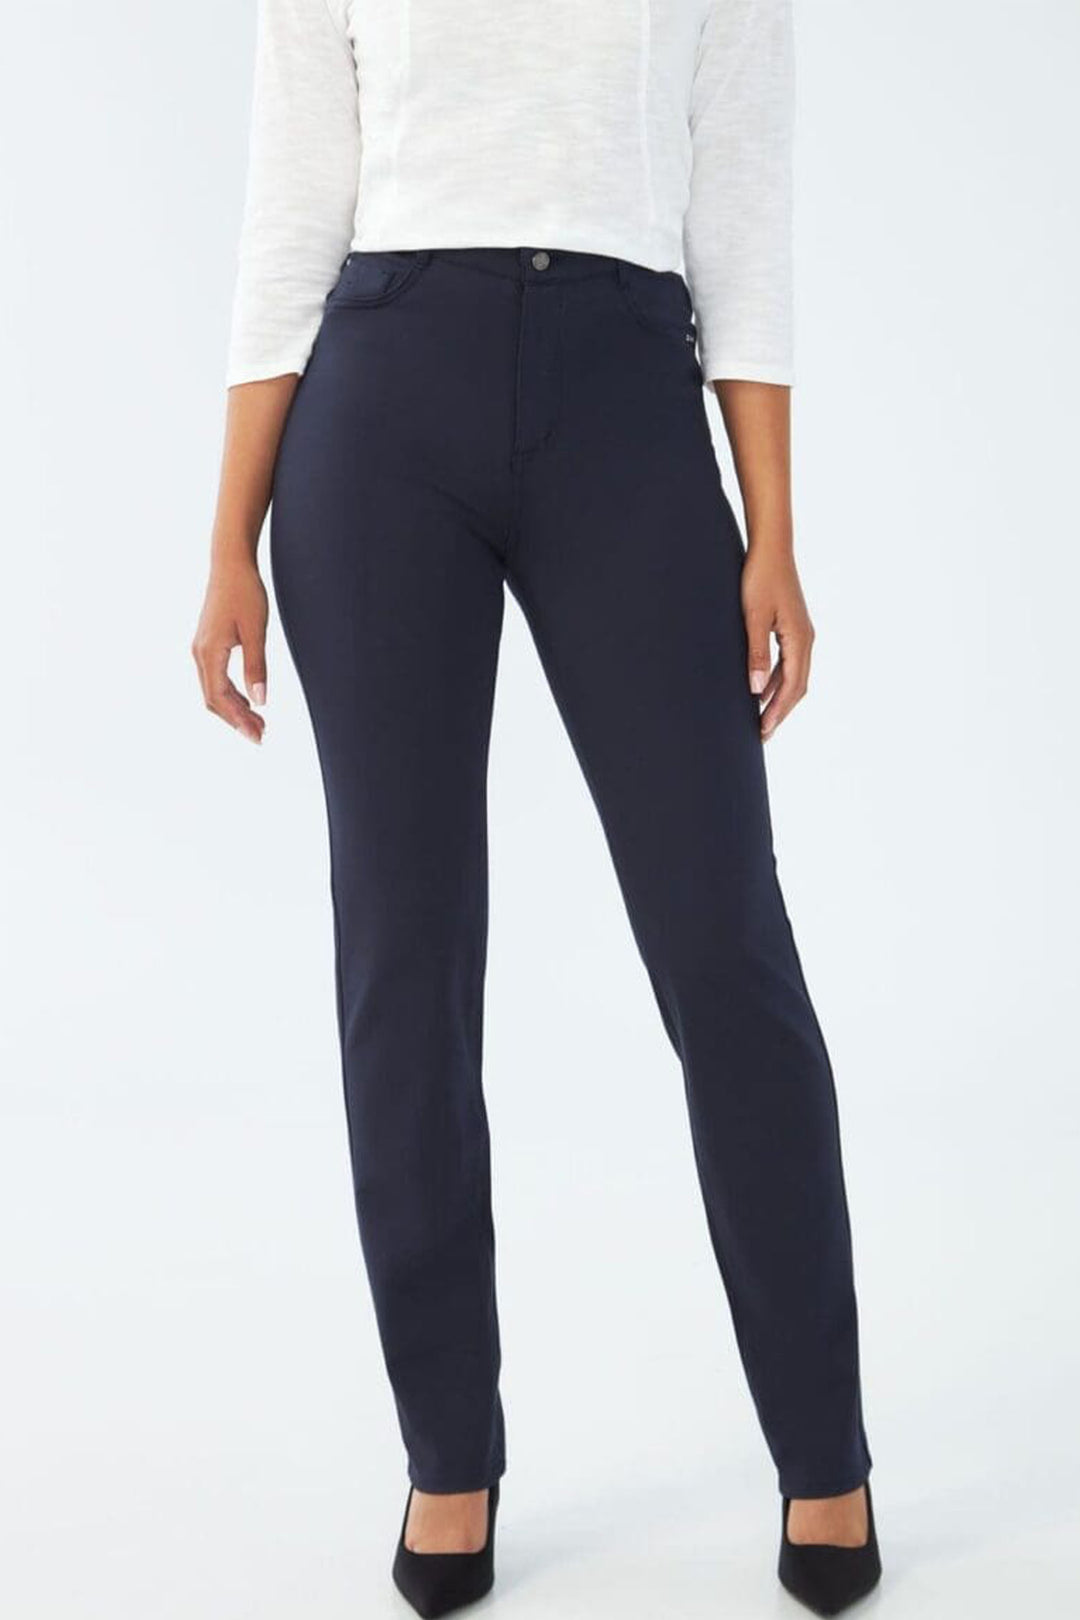 With a wonderwaist for a slimmer fit, smaller size, medium stretch for a firm feel and a high-rise five-pocket design.